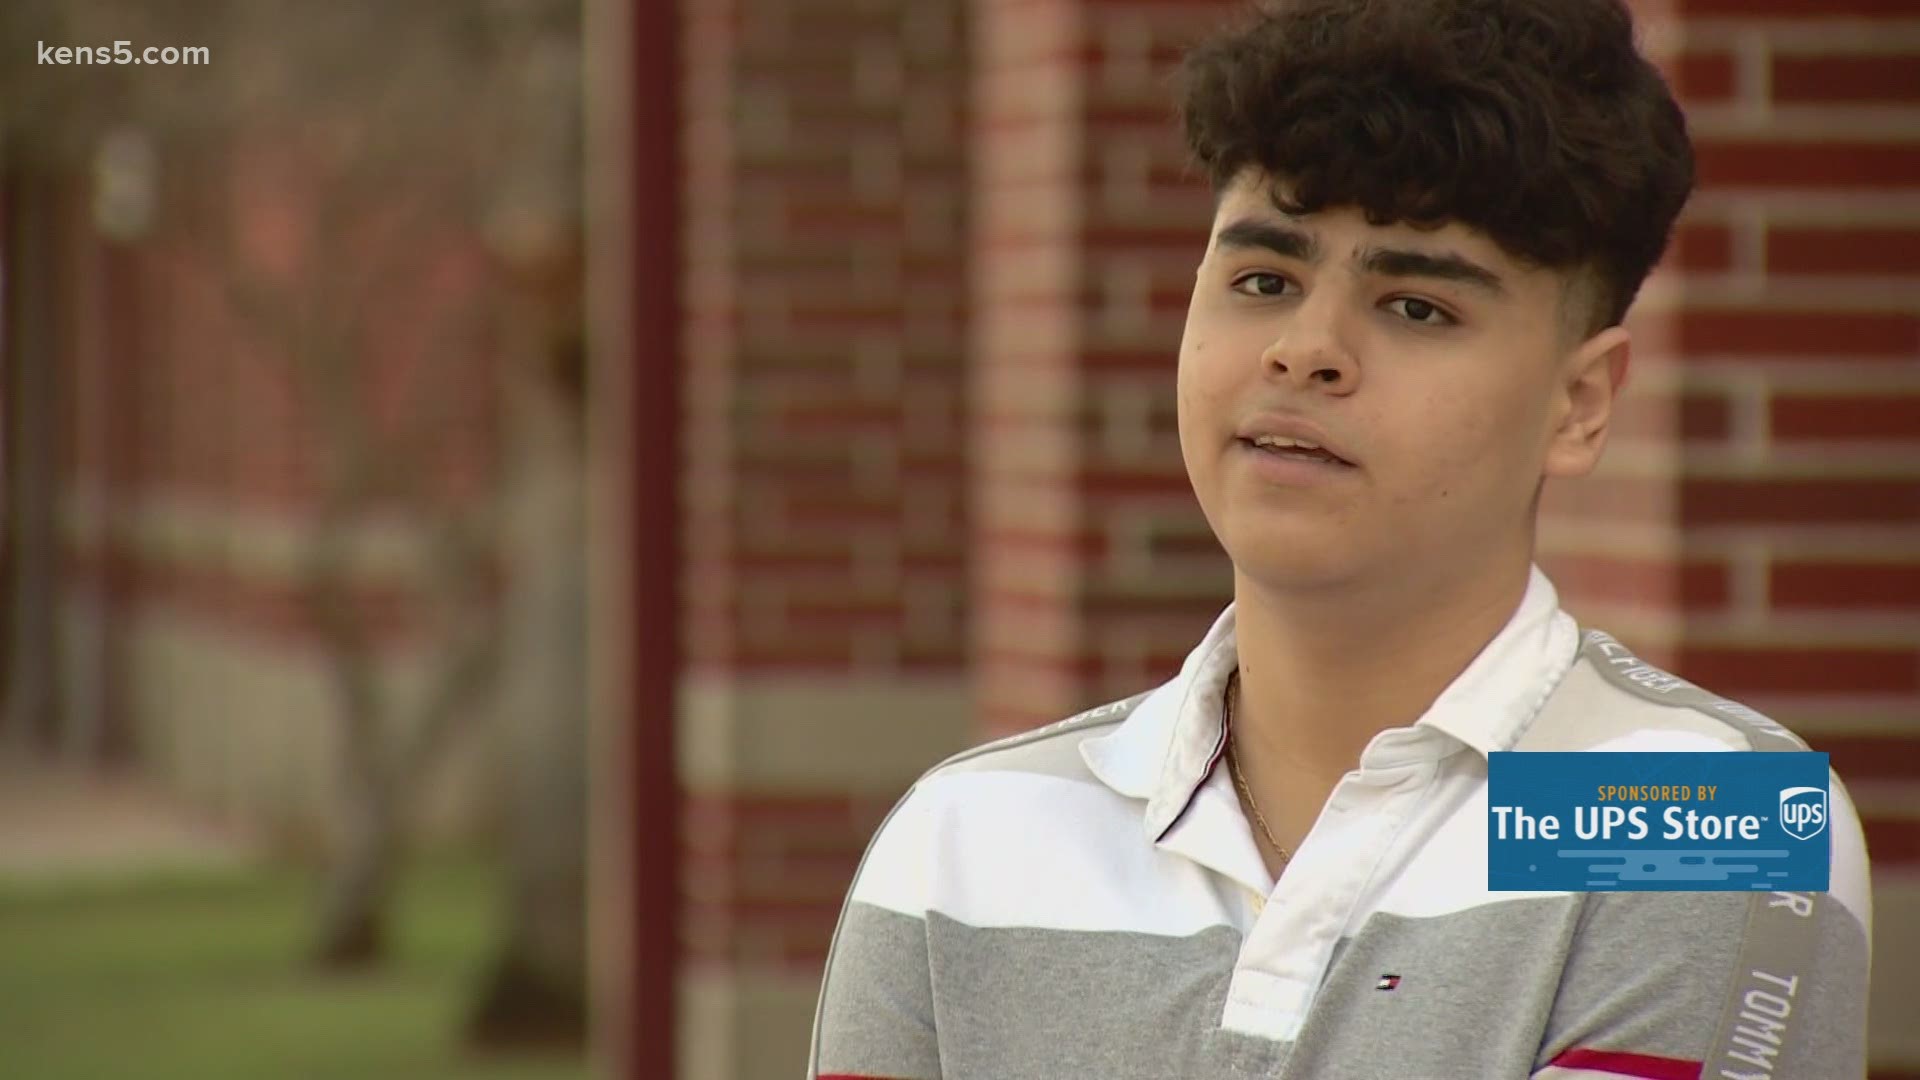 He may only be a 10th grader, but Braulio Sandoval has already exhibited plenty of mettle when it comes to overcoming obstacles.